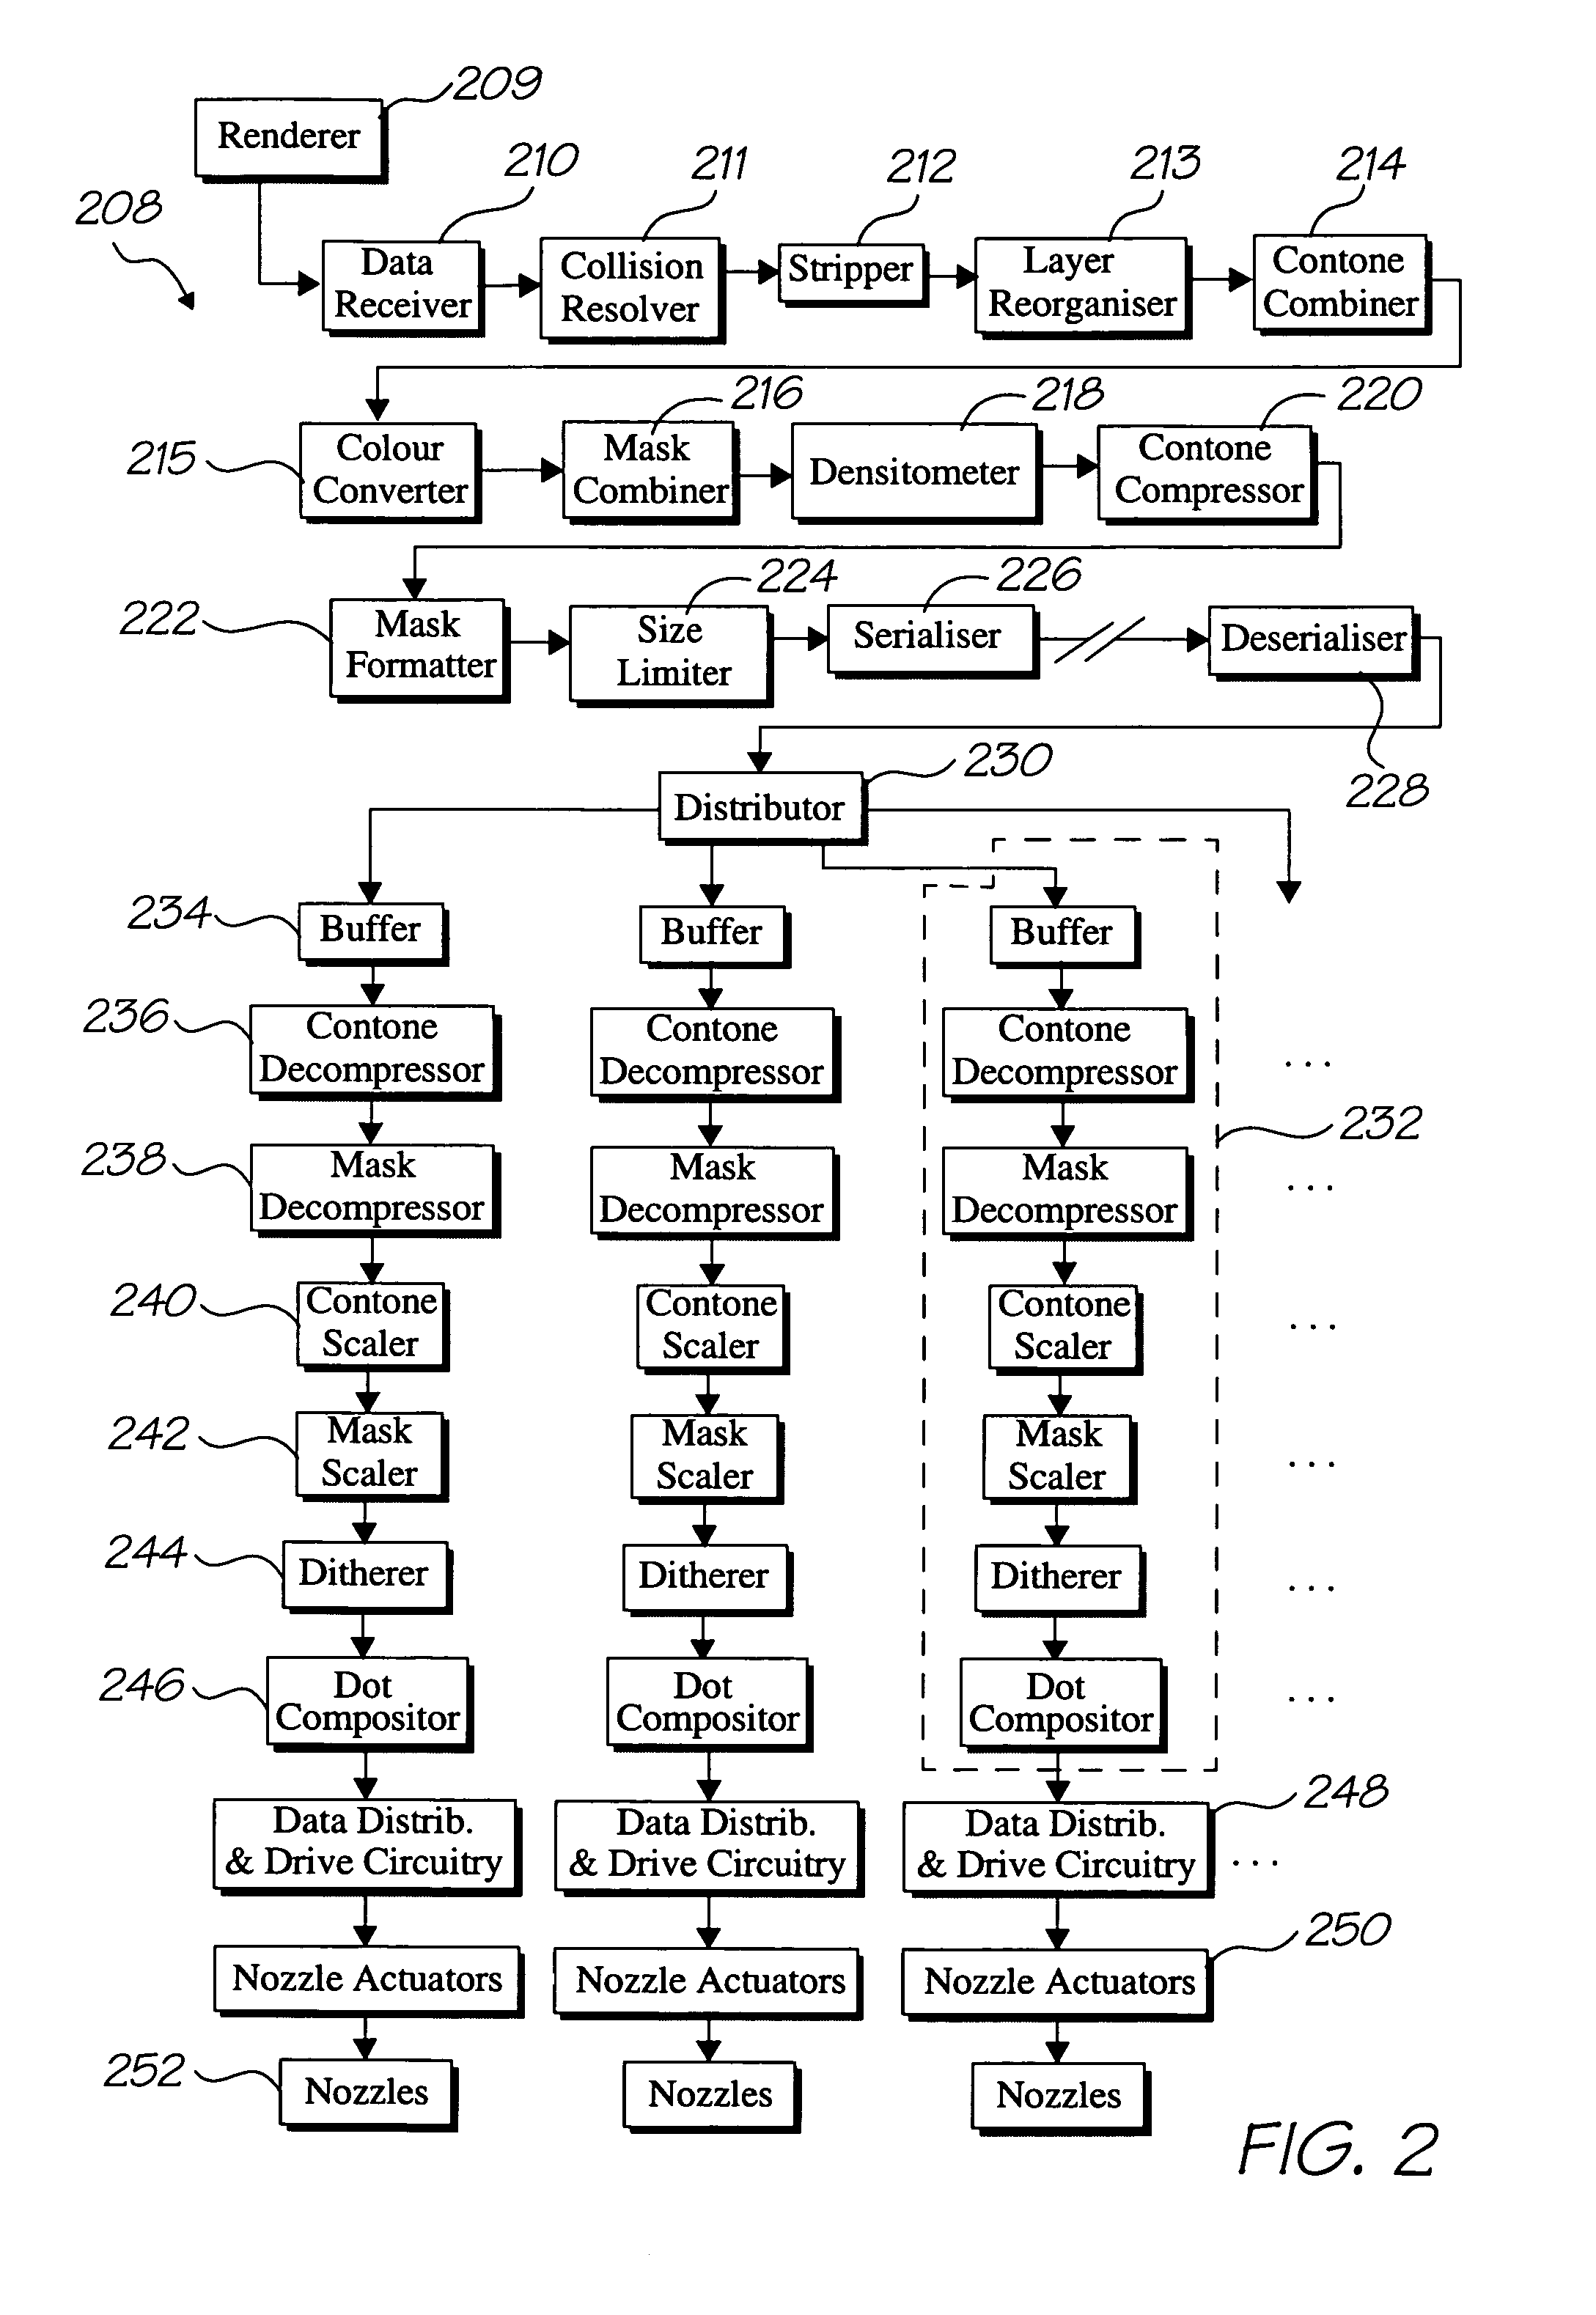 Printing and display device incorporating a data connection hub